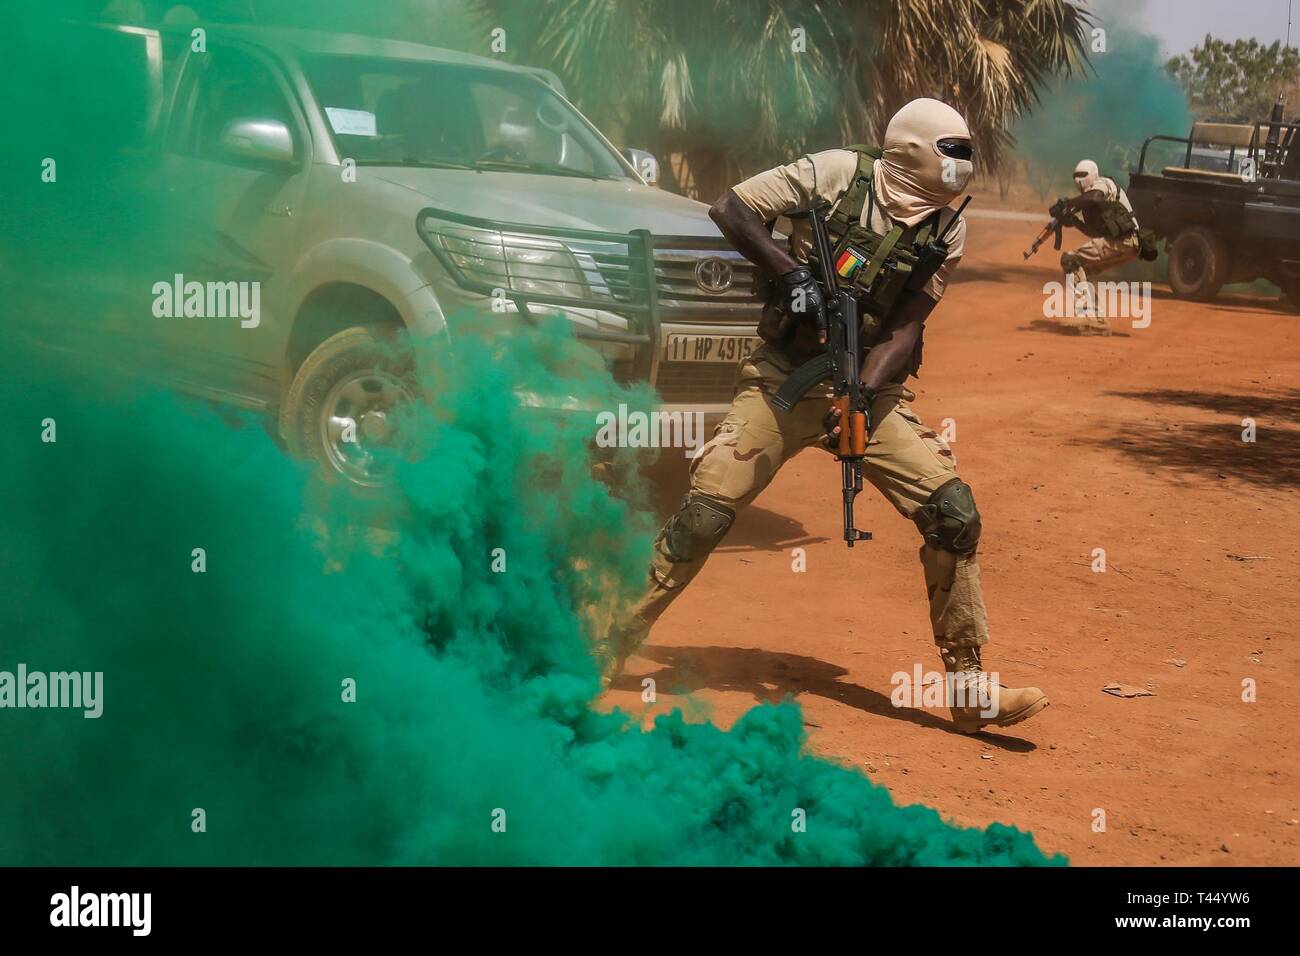 Malian special forces soldiers conduct close quarters battle maneuver training near base camp Loumbila, Burkina Faso, Feb. 25, 2019. The exercise enables Malian soldiers to become proficient with battle movements and communication. Stock Photo